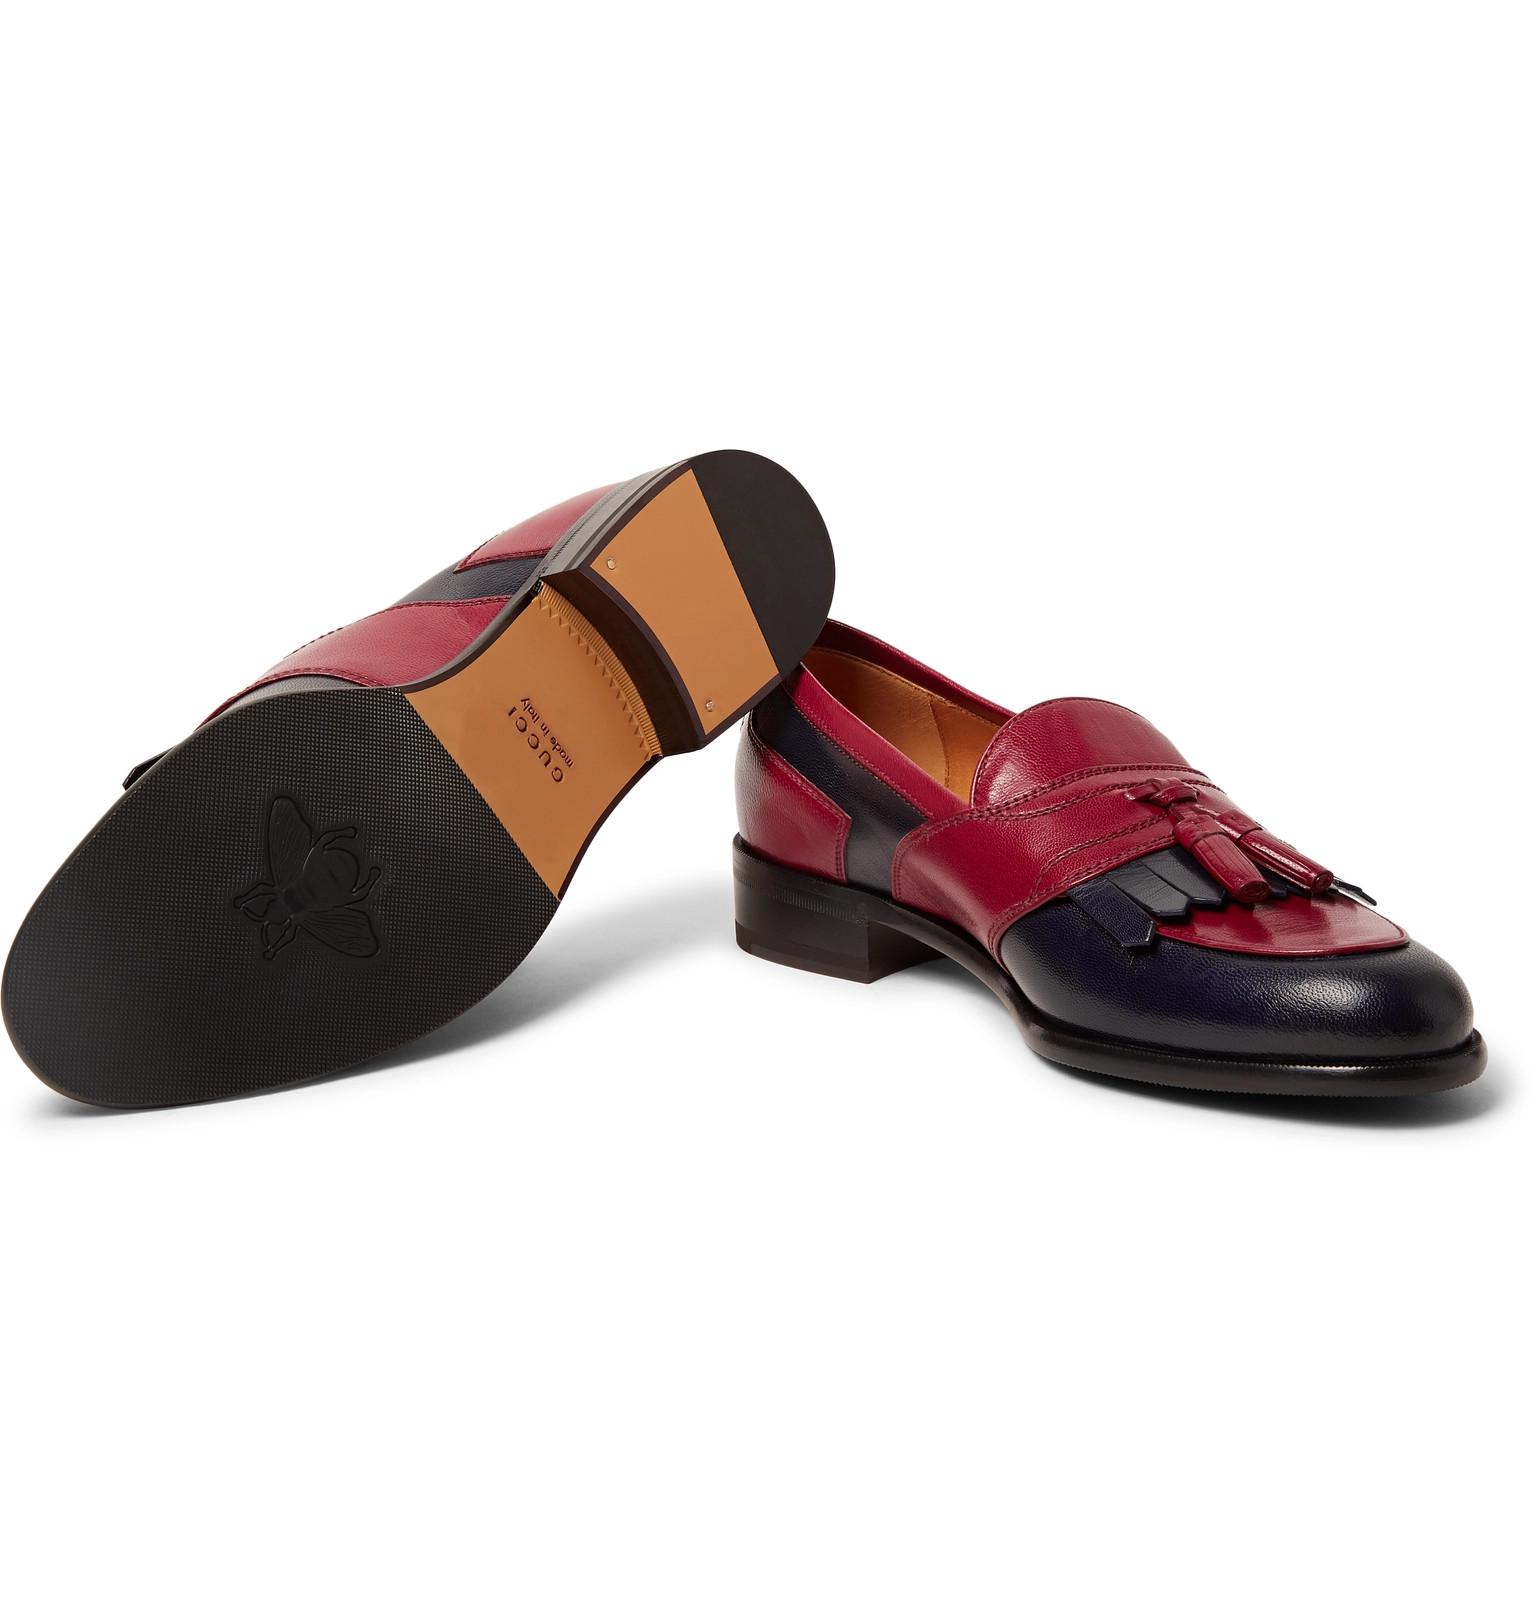 Gucci Curtis Two-tone Leather Tasselled Kiltie Loafers in Claret (Red) for Men - Lyst